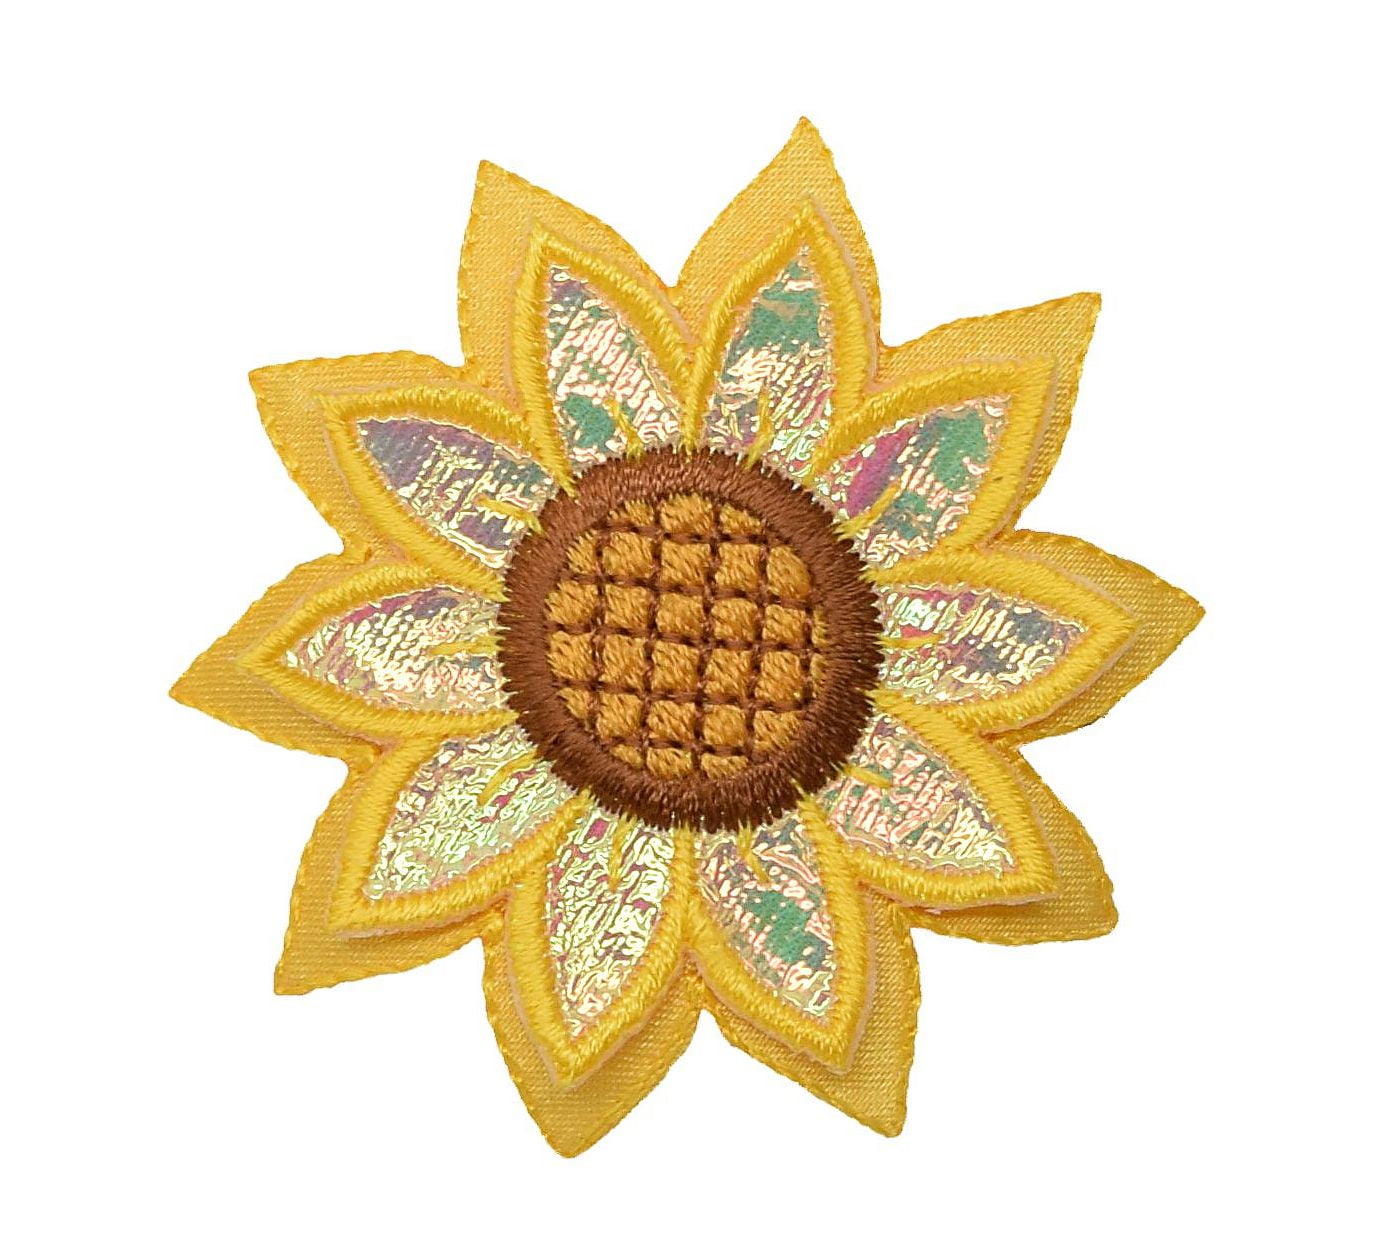 10Pcs Yellow Sunflower Patches Iron on Patch Embroidered Applique Sewing CraU*lc 